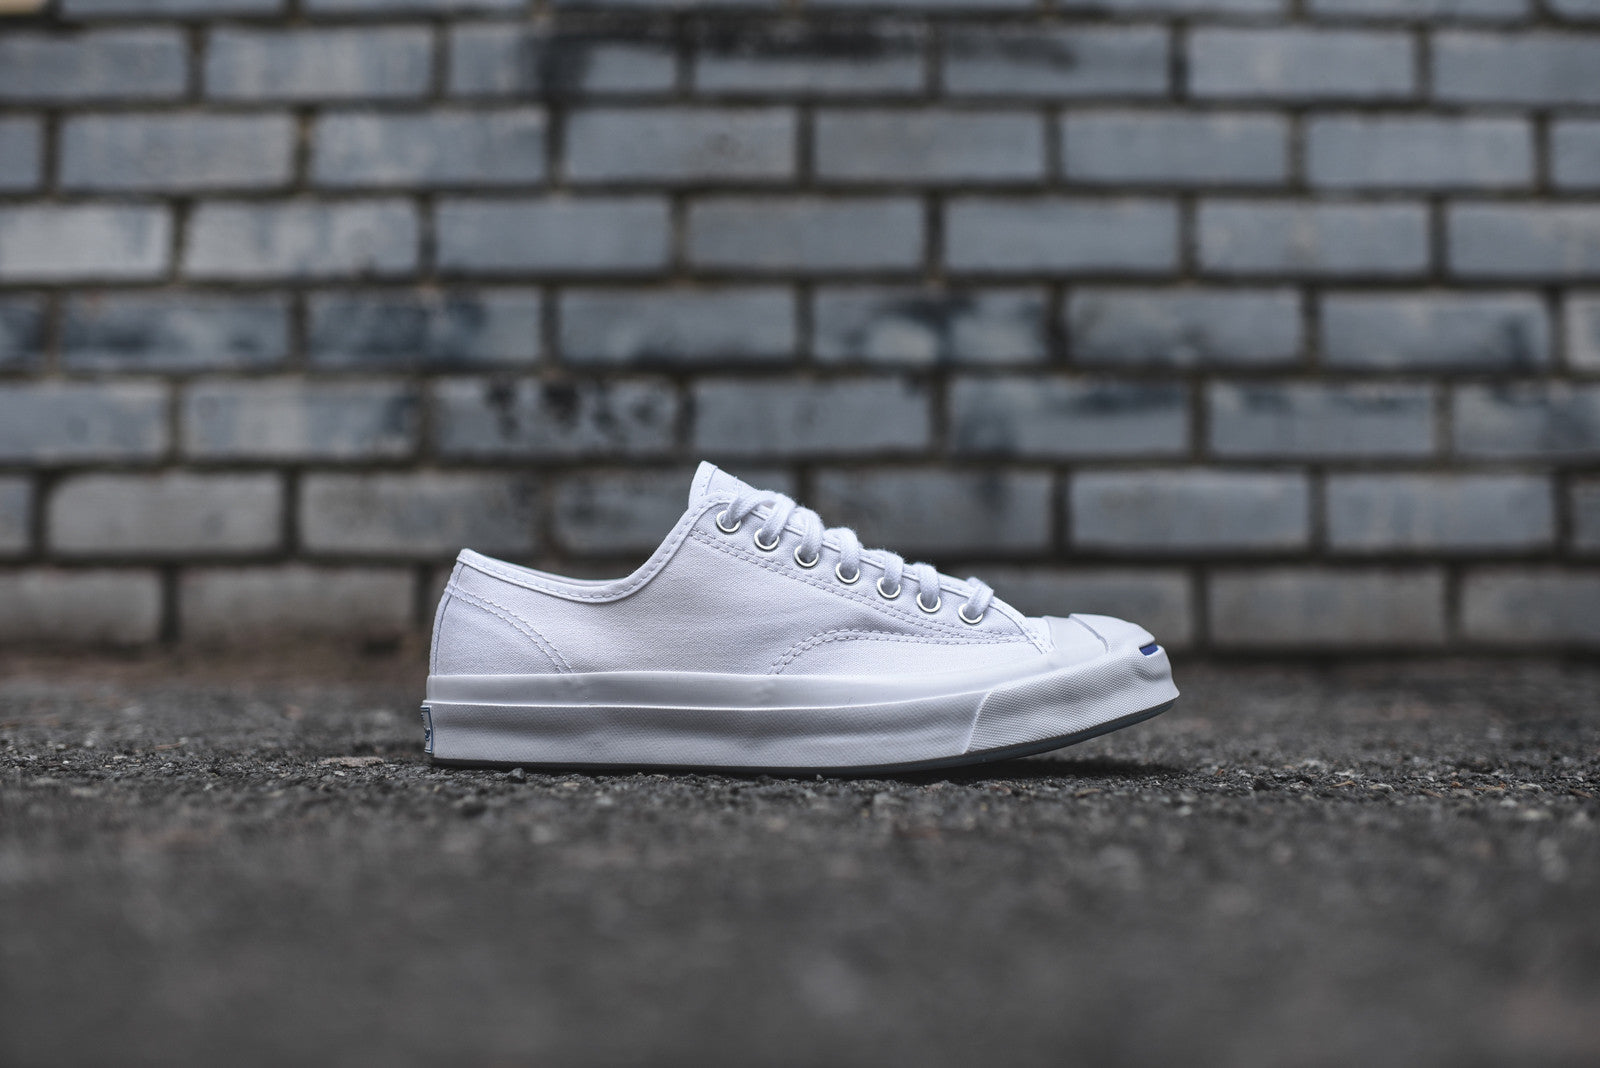 Converse Jack Purcell Signature - White – Kith NYC